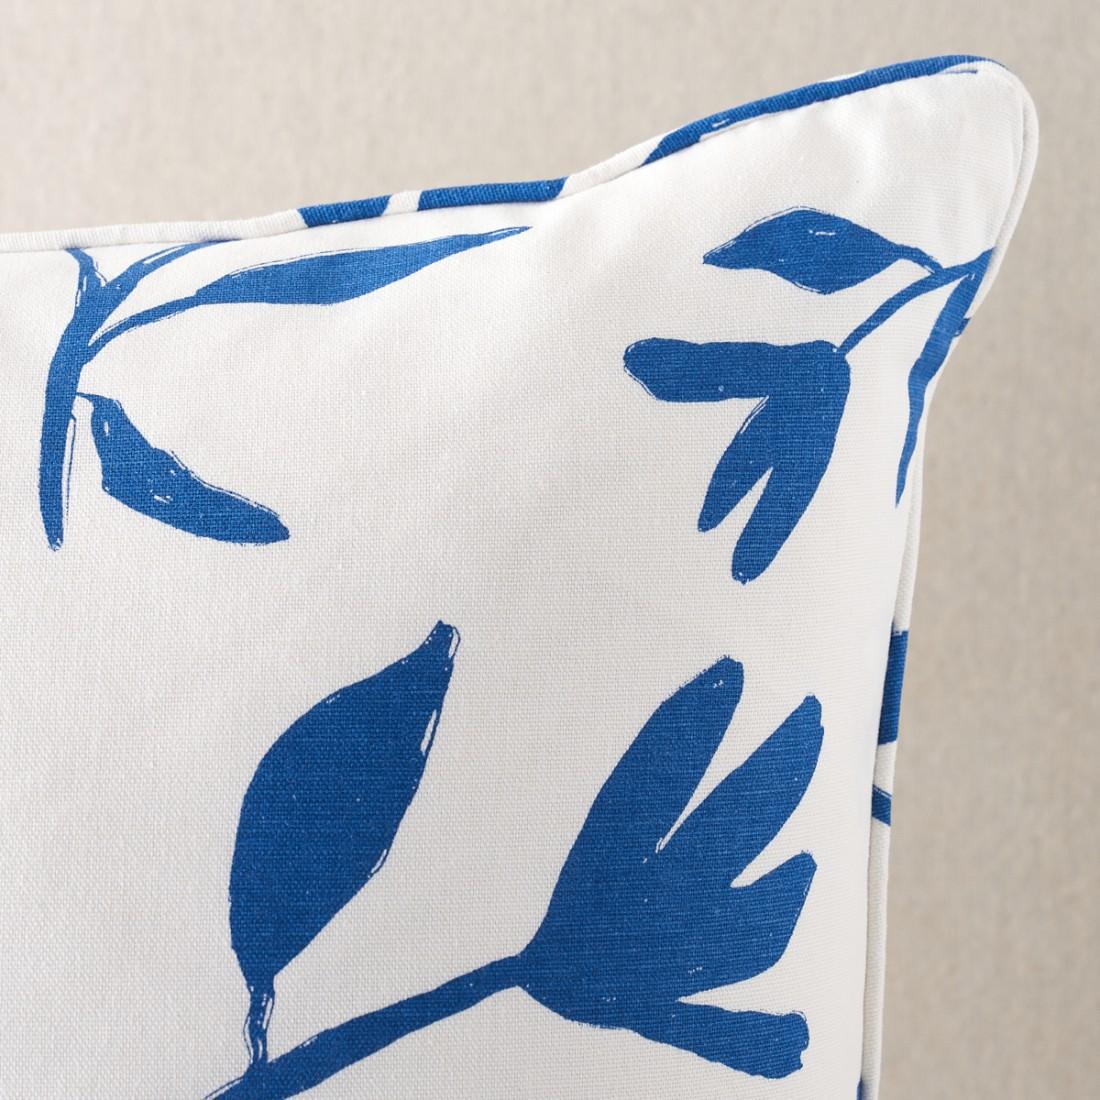 This pillow features Laurel with a knife edge finish. Laurel is a lovely loose botanical fabric design that features painterly, floating silhouettes of small leafy sprigs. Screen-printed on a soft cotton-linen union cloth ground, this allover